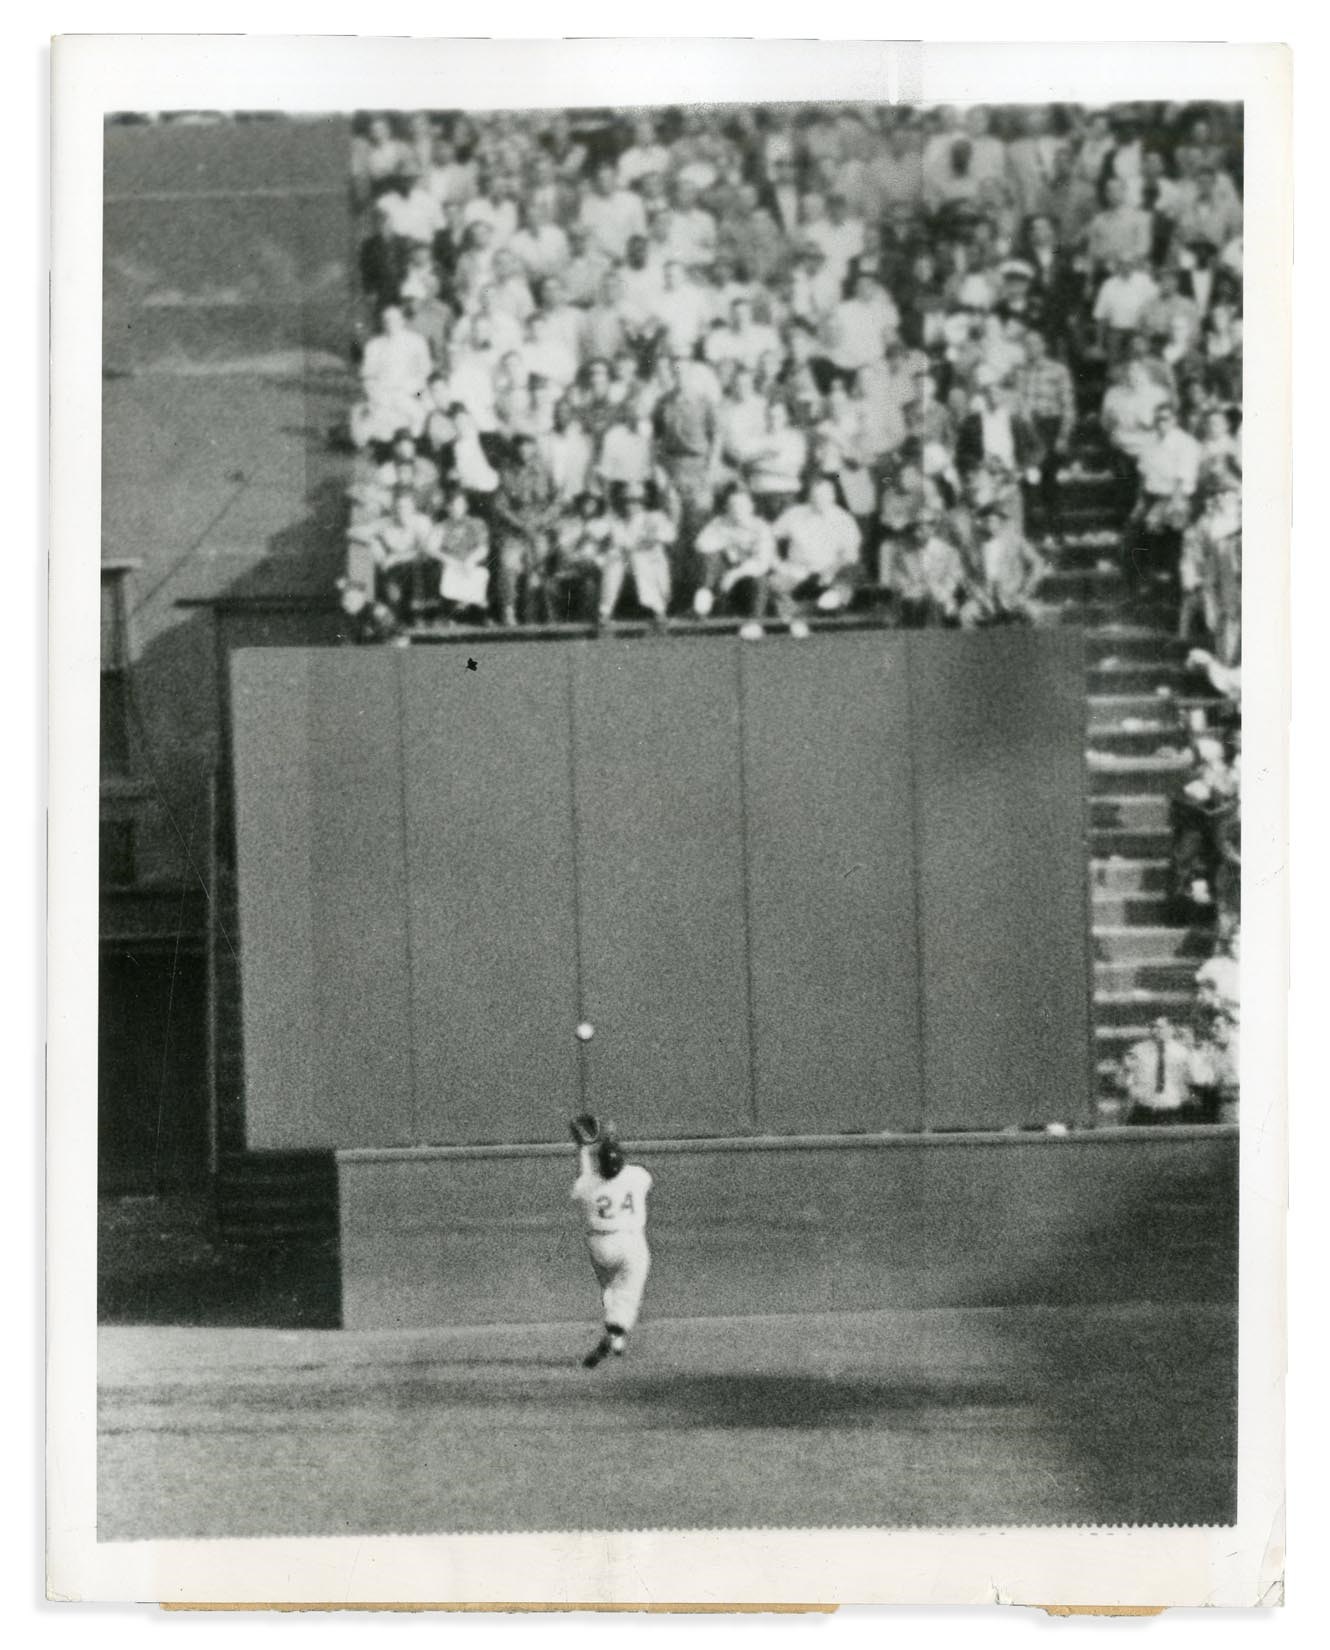 Vintage Sports Photographs - The Definitive Willie Mays "The Catch" Photo (Type 1)